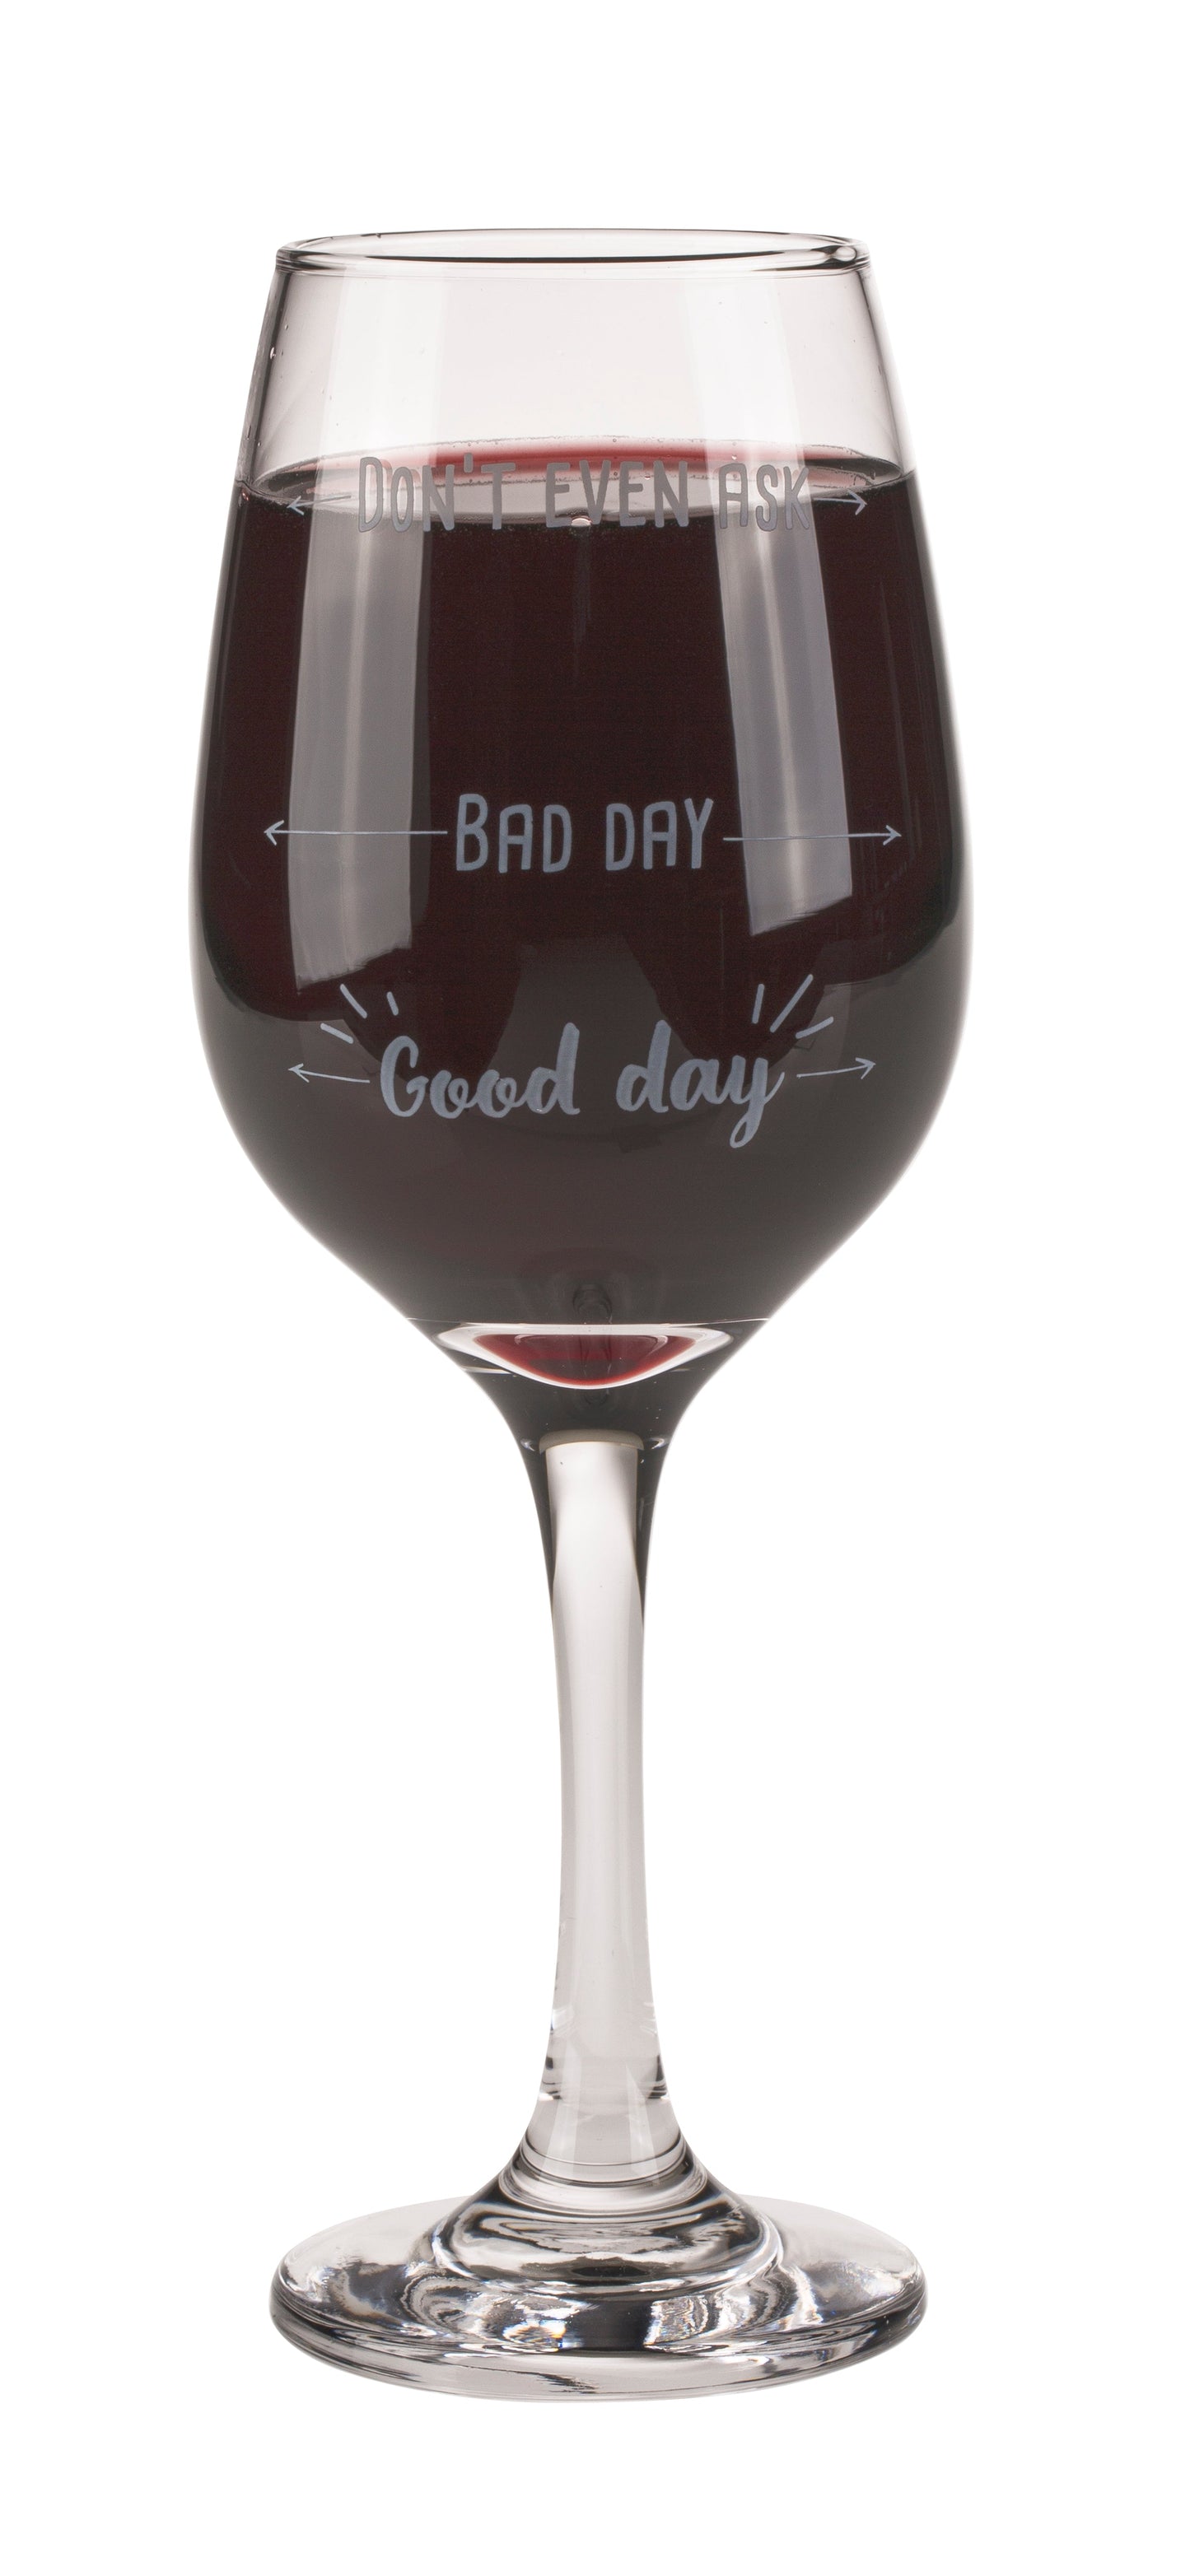 Wine Glass - Mood Barometer - Good day/ Bad Day/ Don't Even Ask